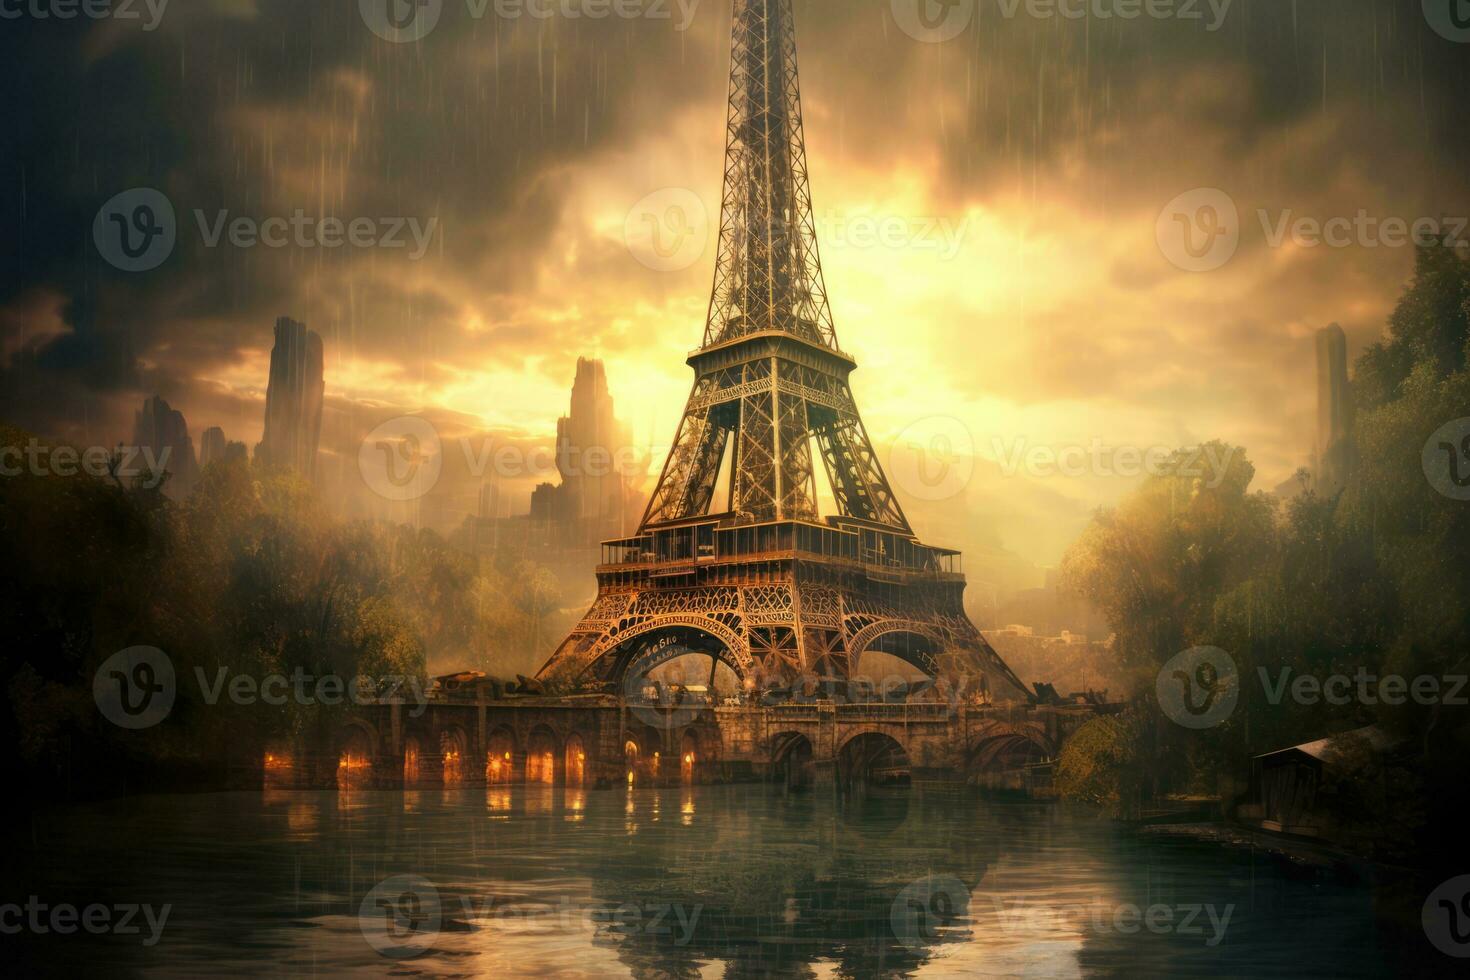 the Eiffel Tower, an iconic landmark of Paris, France, situated on the banks of a river. As the sun shines upon it, the majestic tower glows in the golden light, creating an awe-inspiring atmosphere. photo